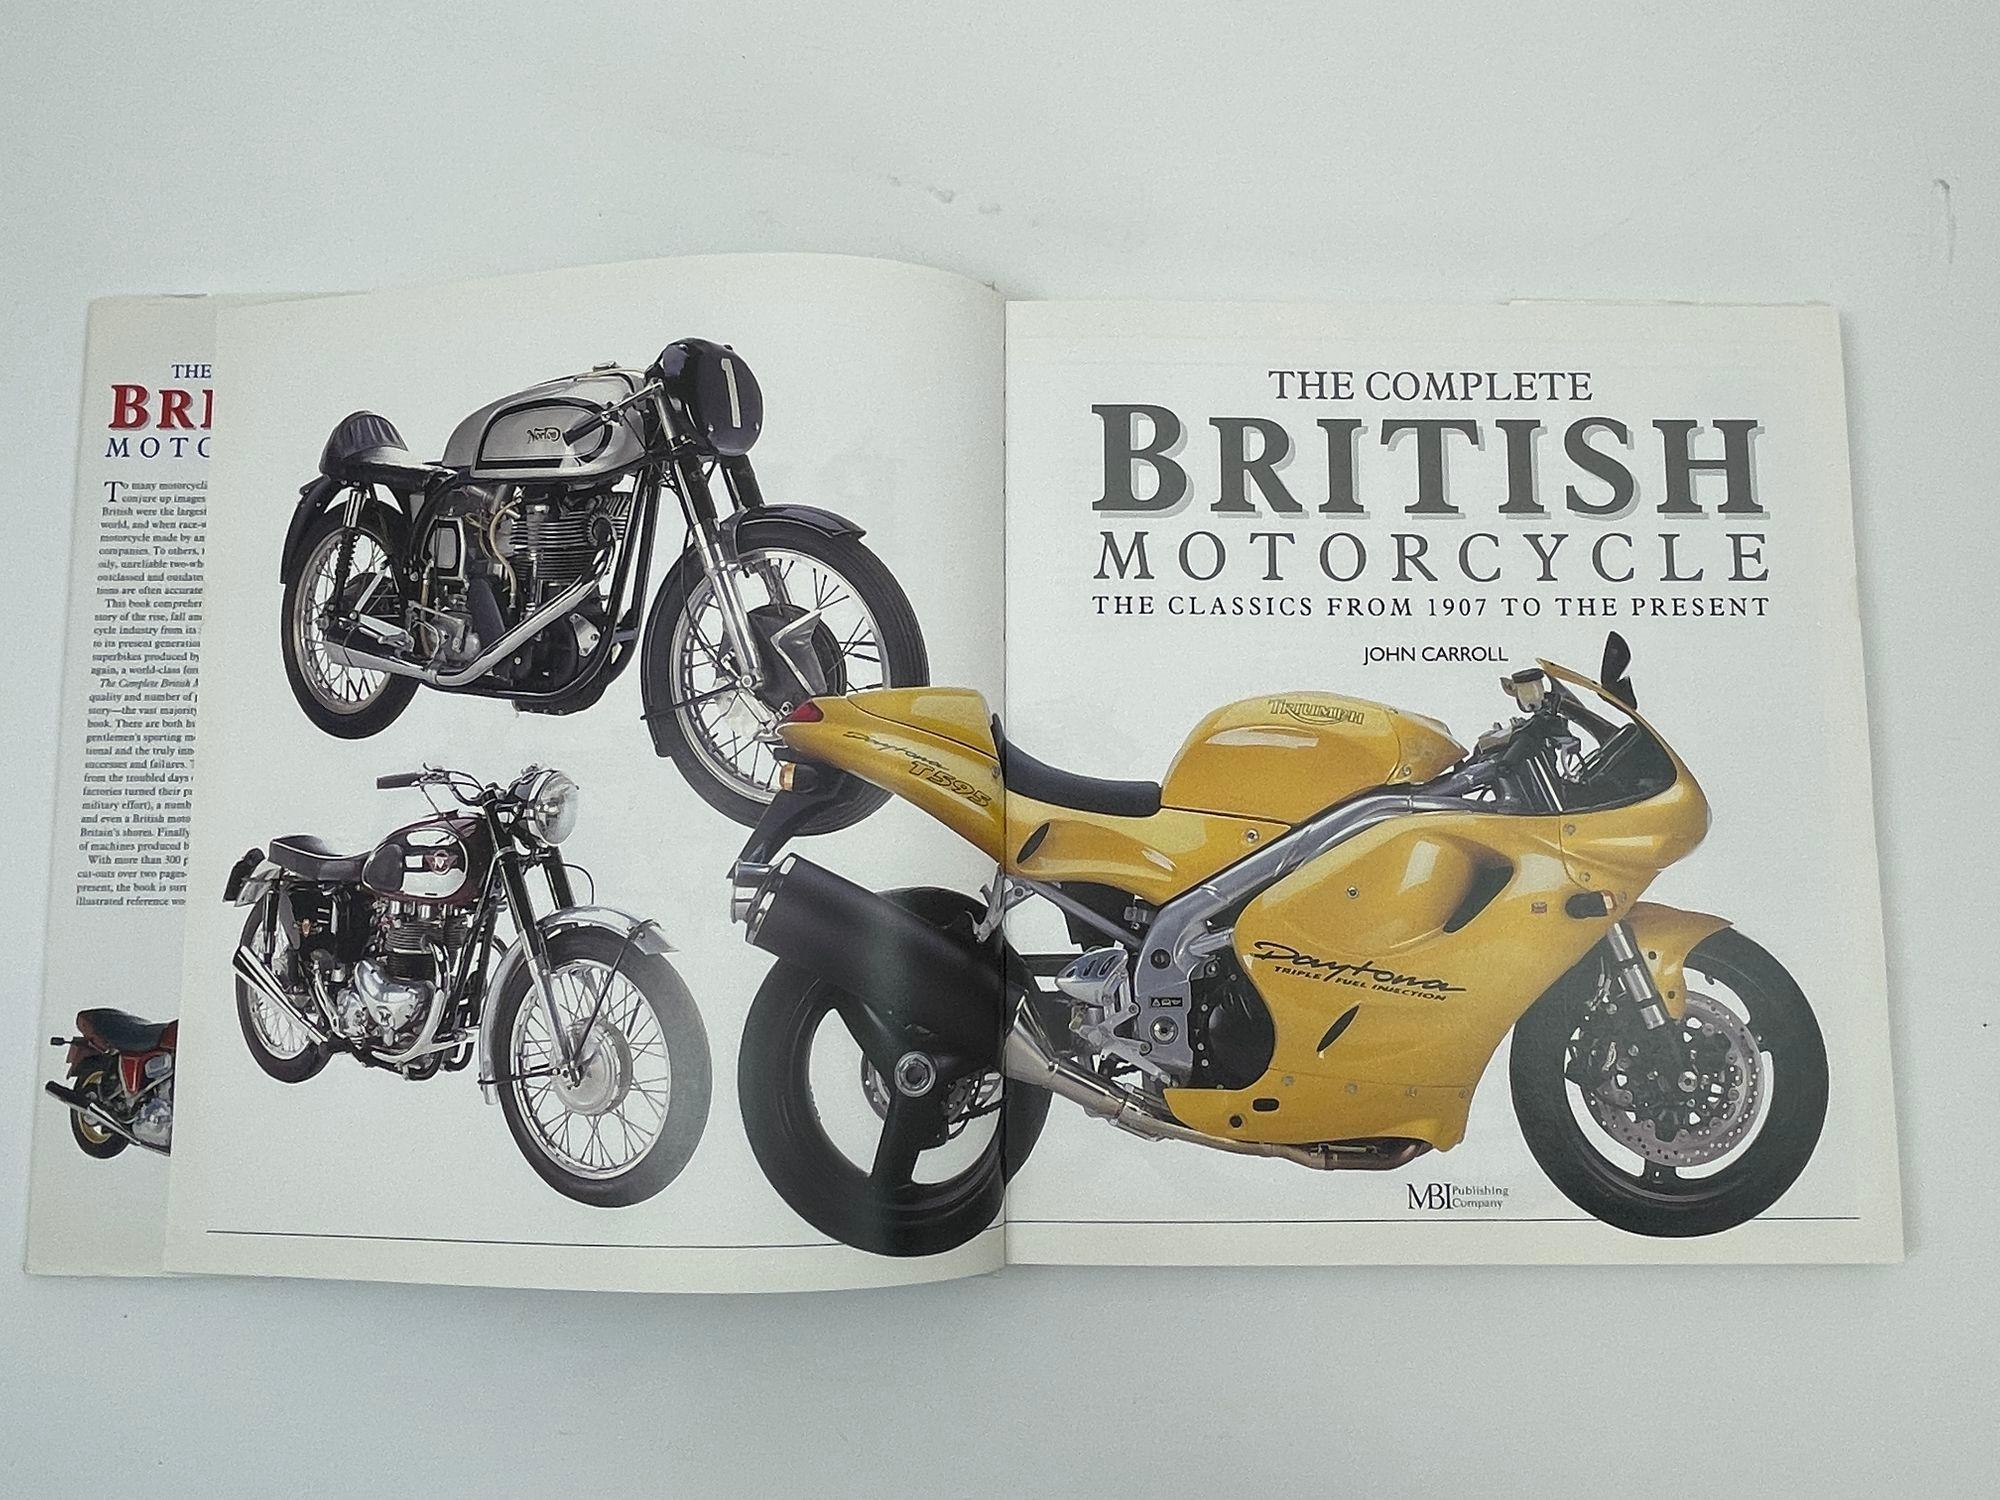 The Complete British Motorcycle The Classics From 1907 To The Present J Carroll In Good Condition For Sale In North Hollywood, CA